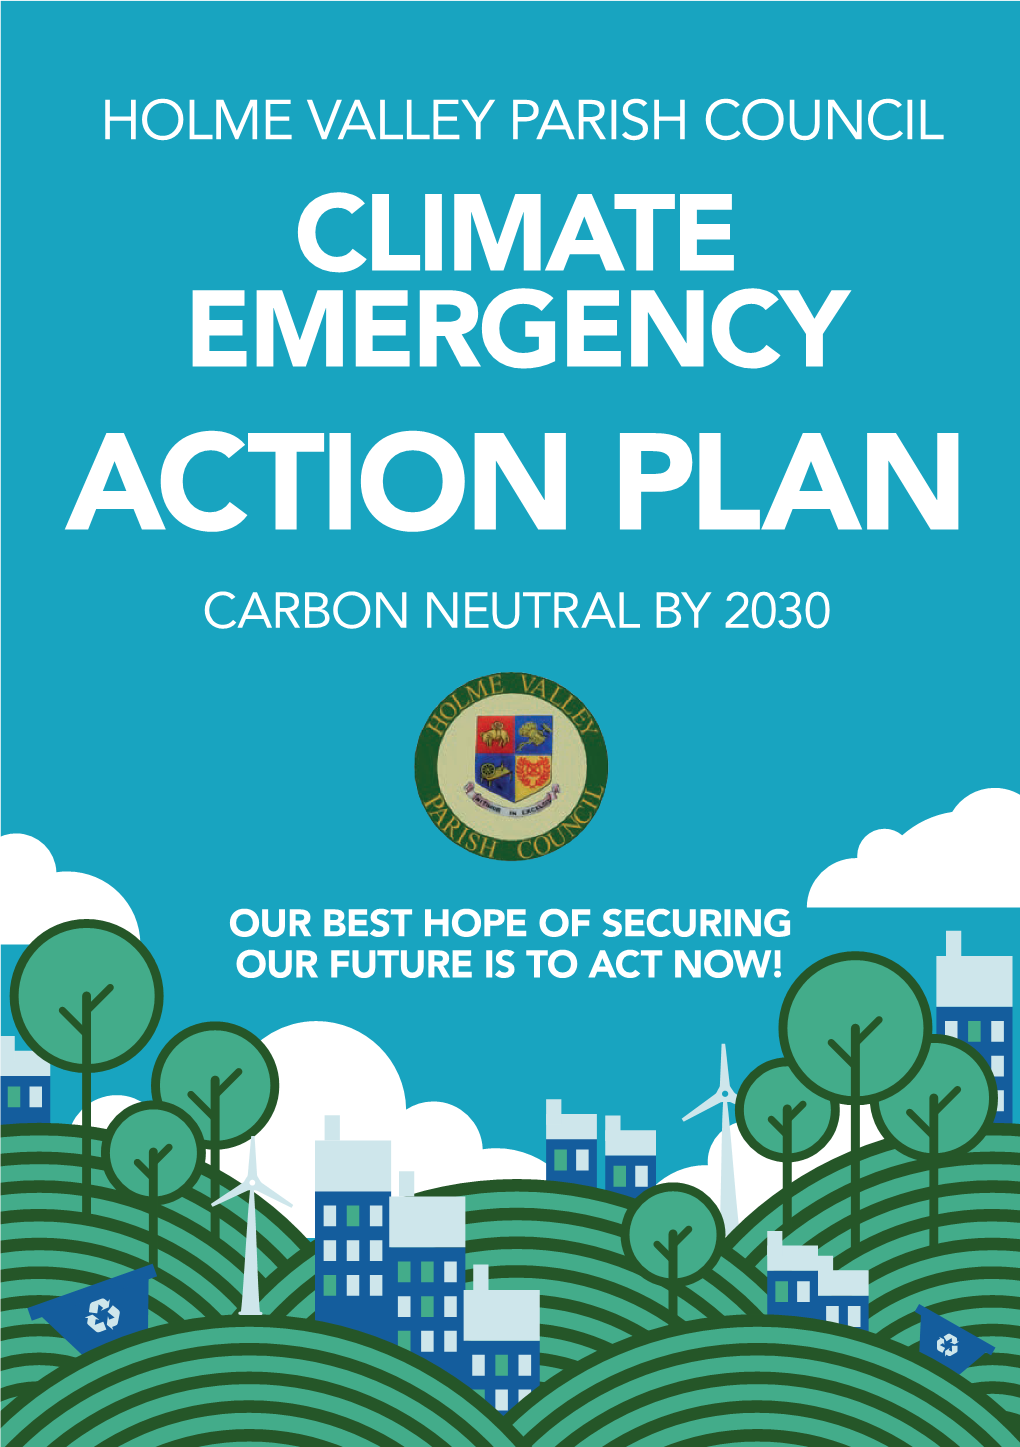 Action Plan Carbon Neutral by 2030